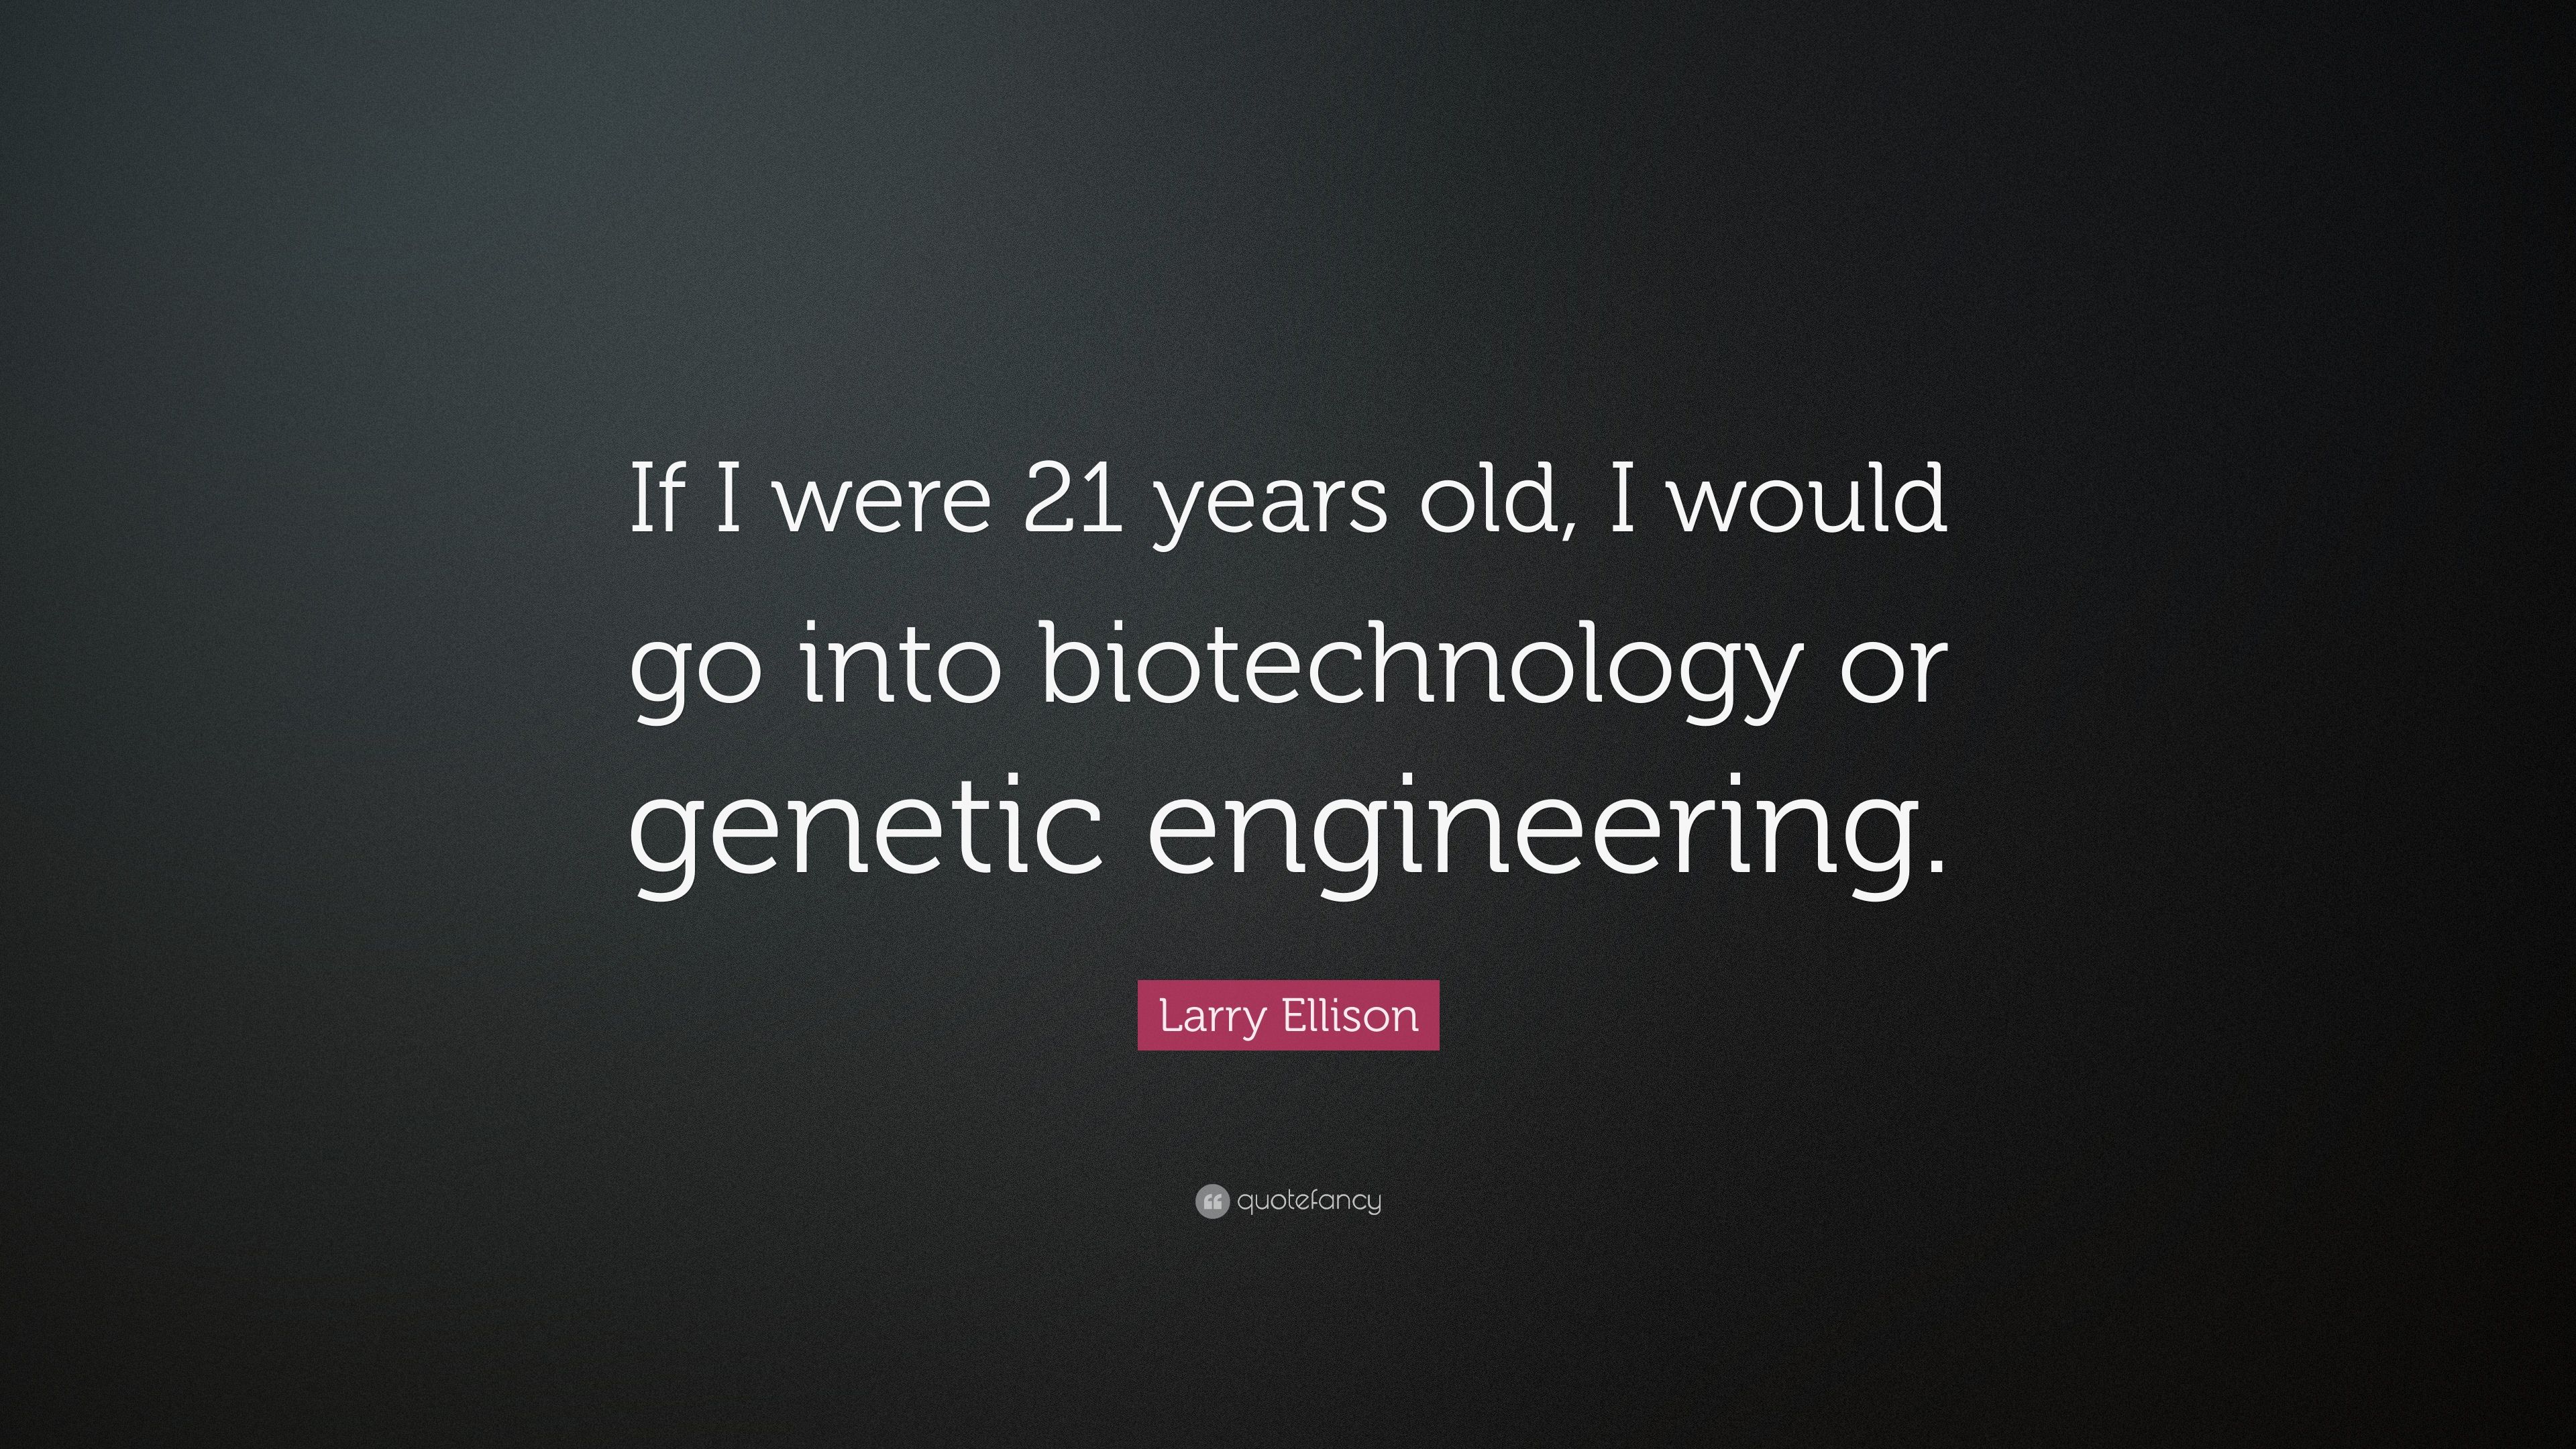 Larry Ellison Quote: “If I were 21 years old, I would go into